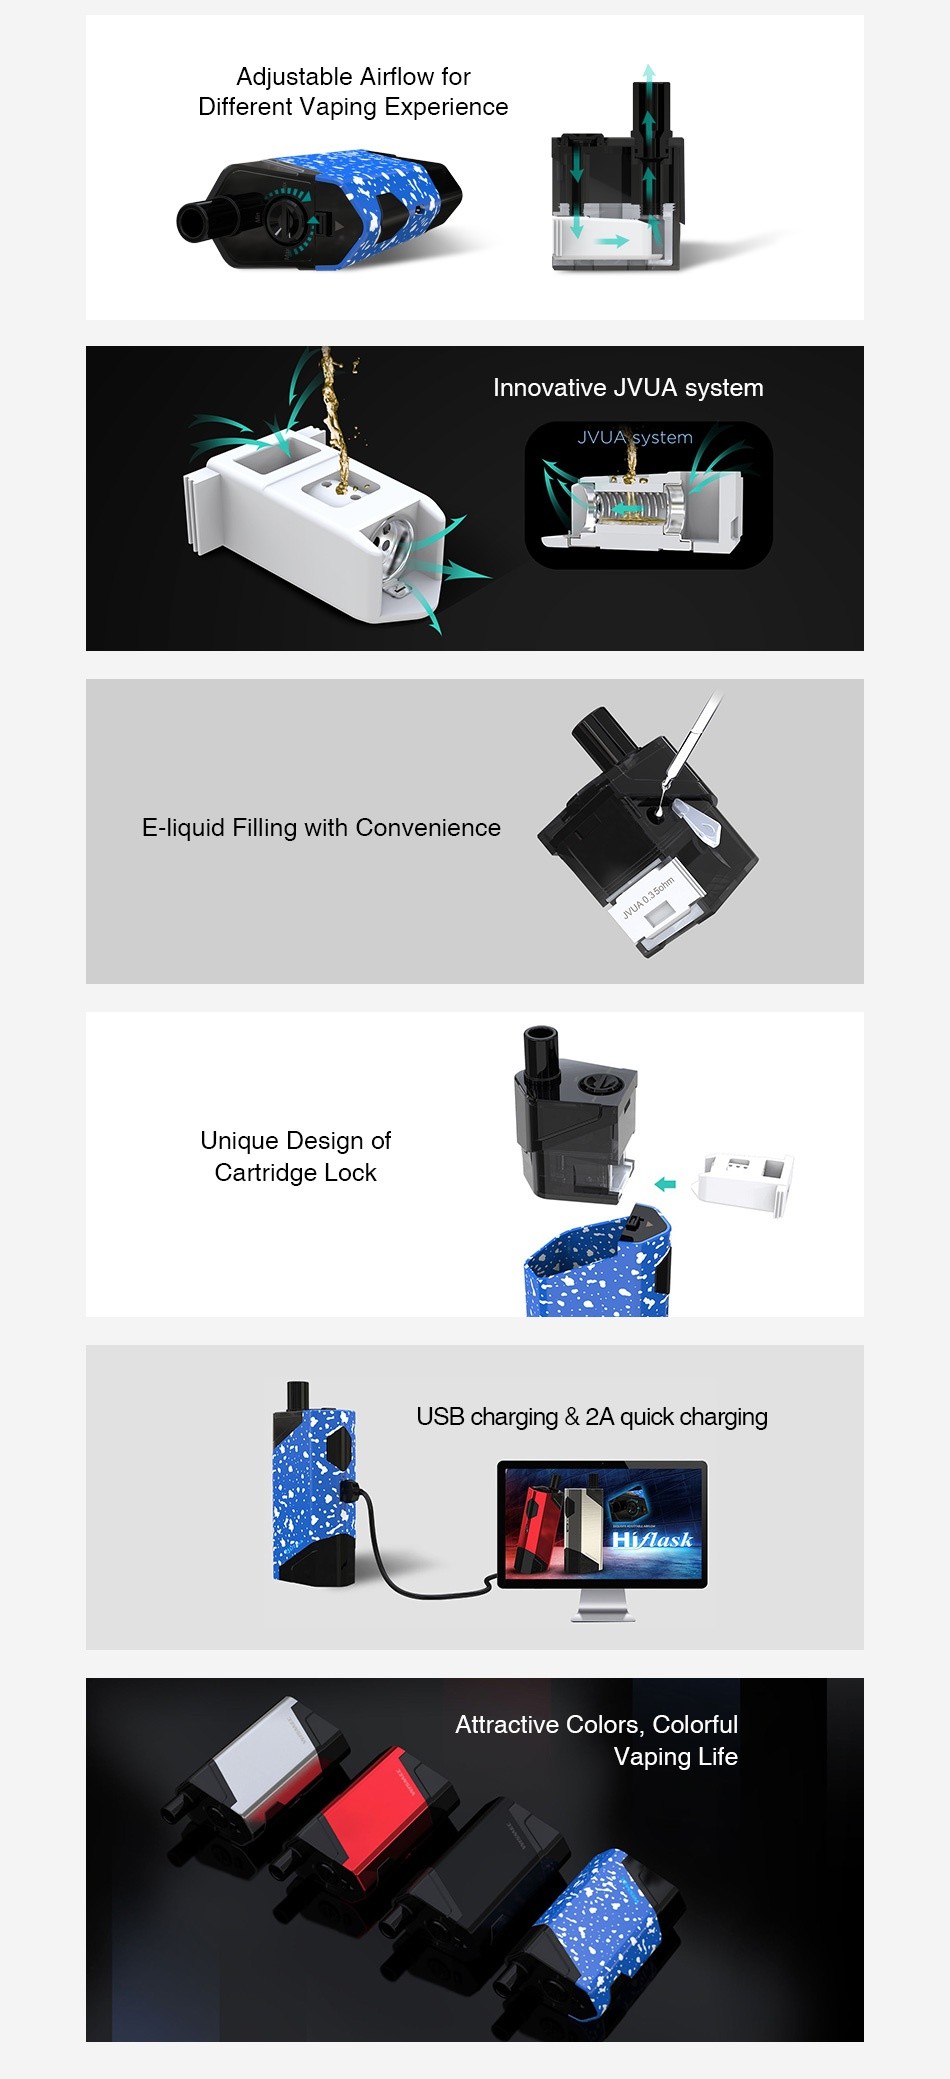 WISMEC HiFlask Starter Kit 2100mAh Adjustable Airflow for Different Vaping Experience Innovative JVUA system JVUAsystem E liquid Filling with Convenience Unique Design of Cartridge Lock USB charging 2A quick charging Iask Attractive Colors  Colorful Vaping Life